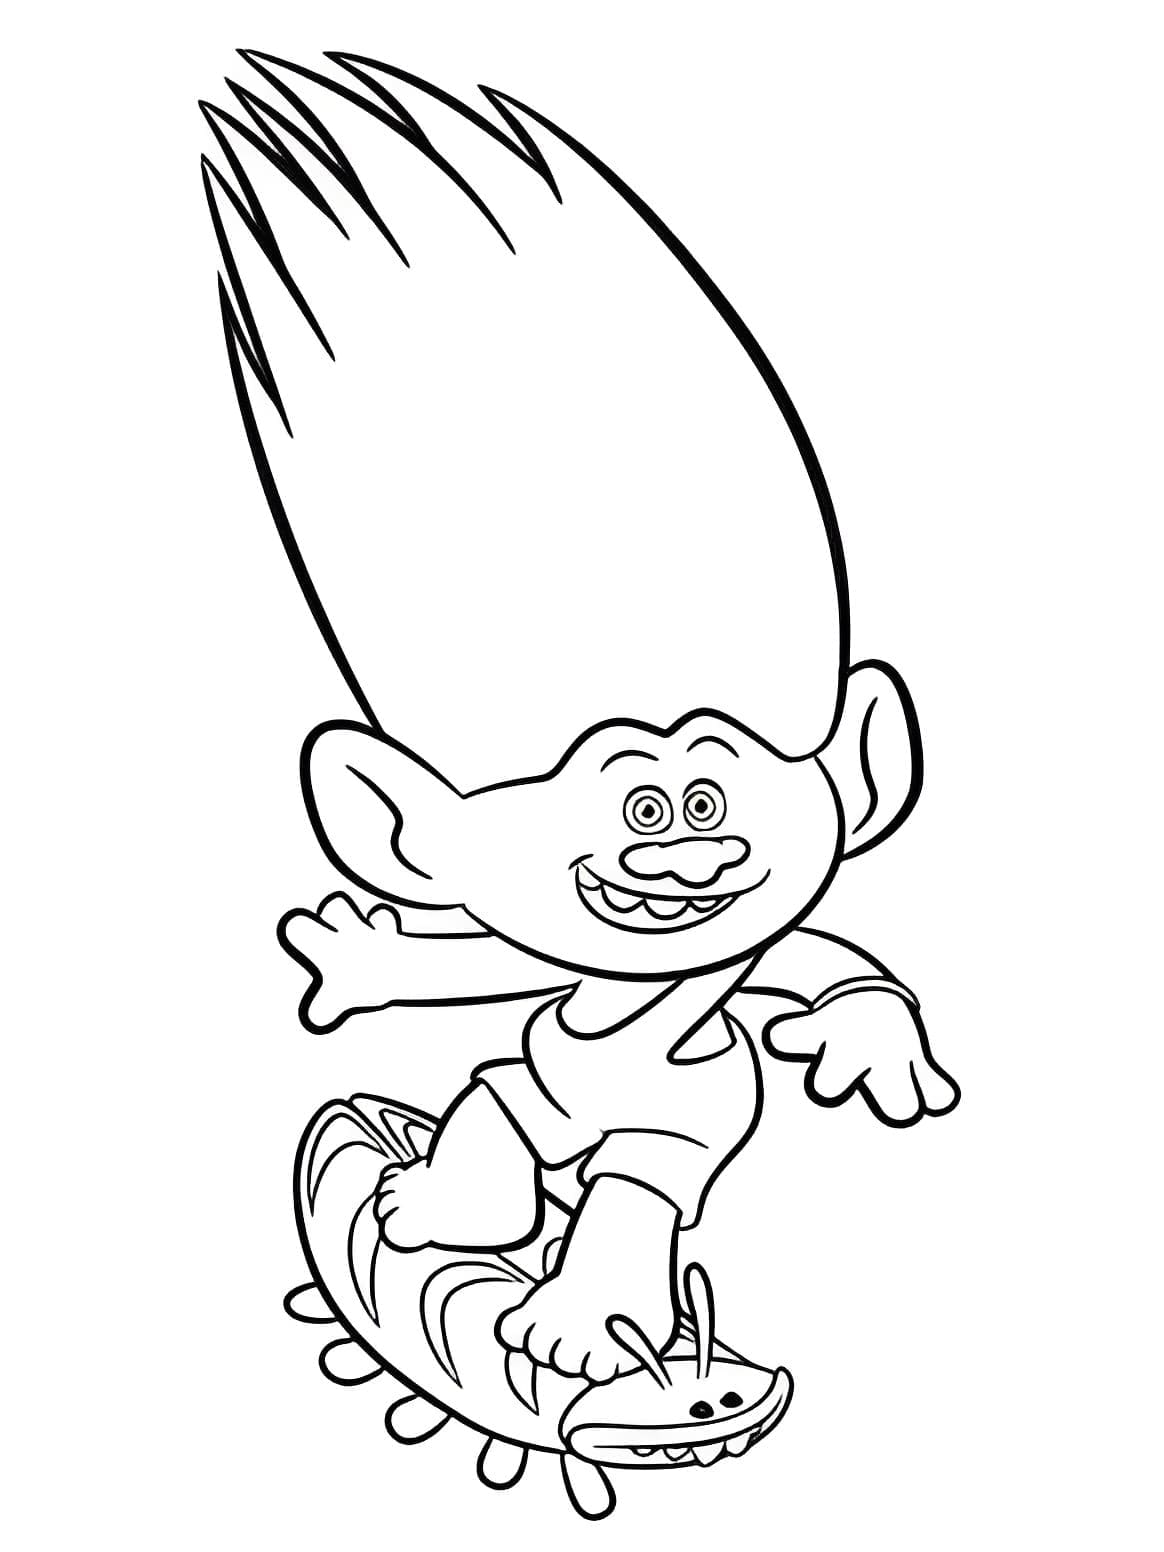 Trolls Aspen Heitz coloring page - Download, Print or Color Online for Free